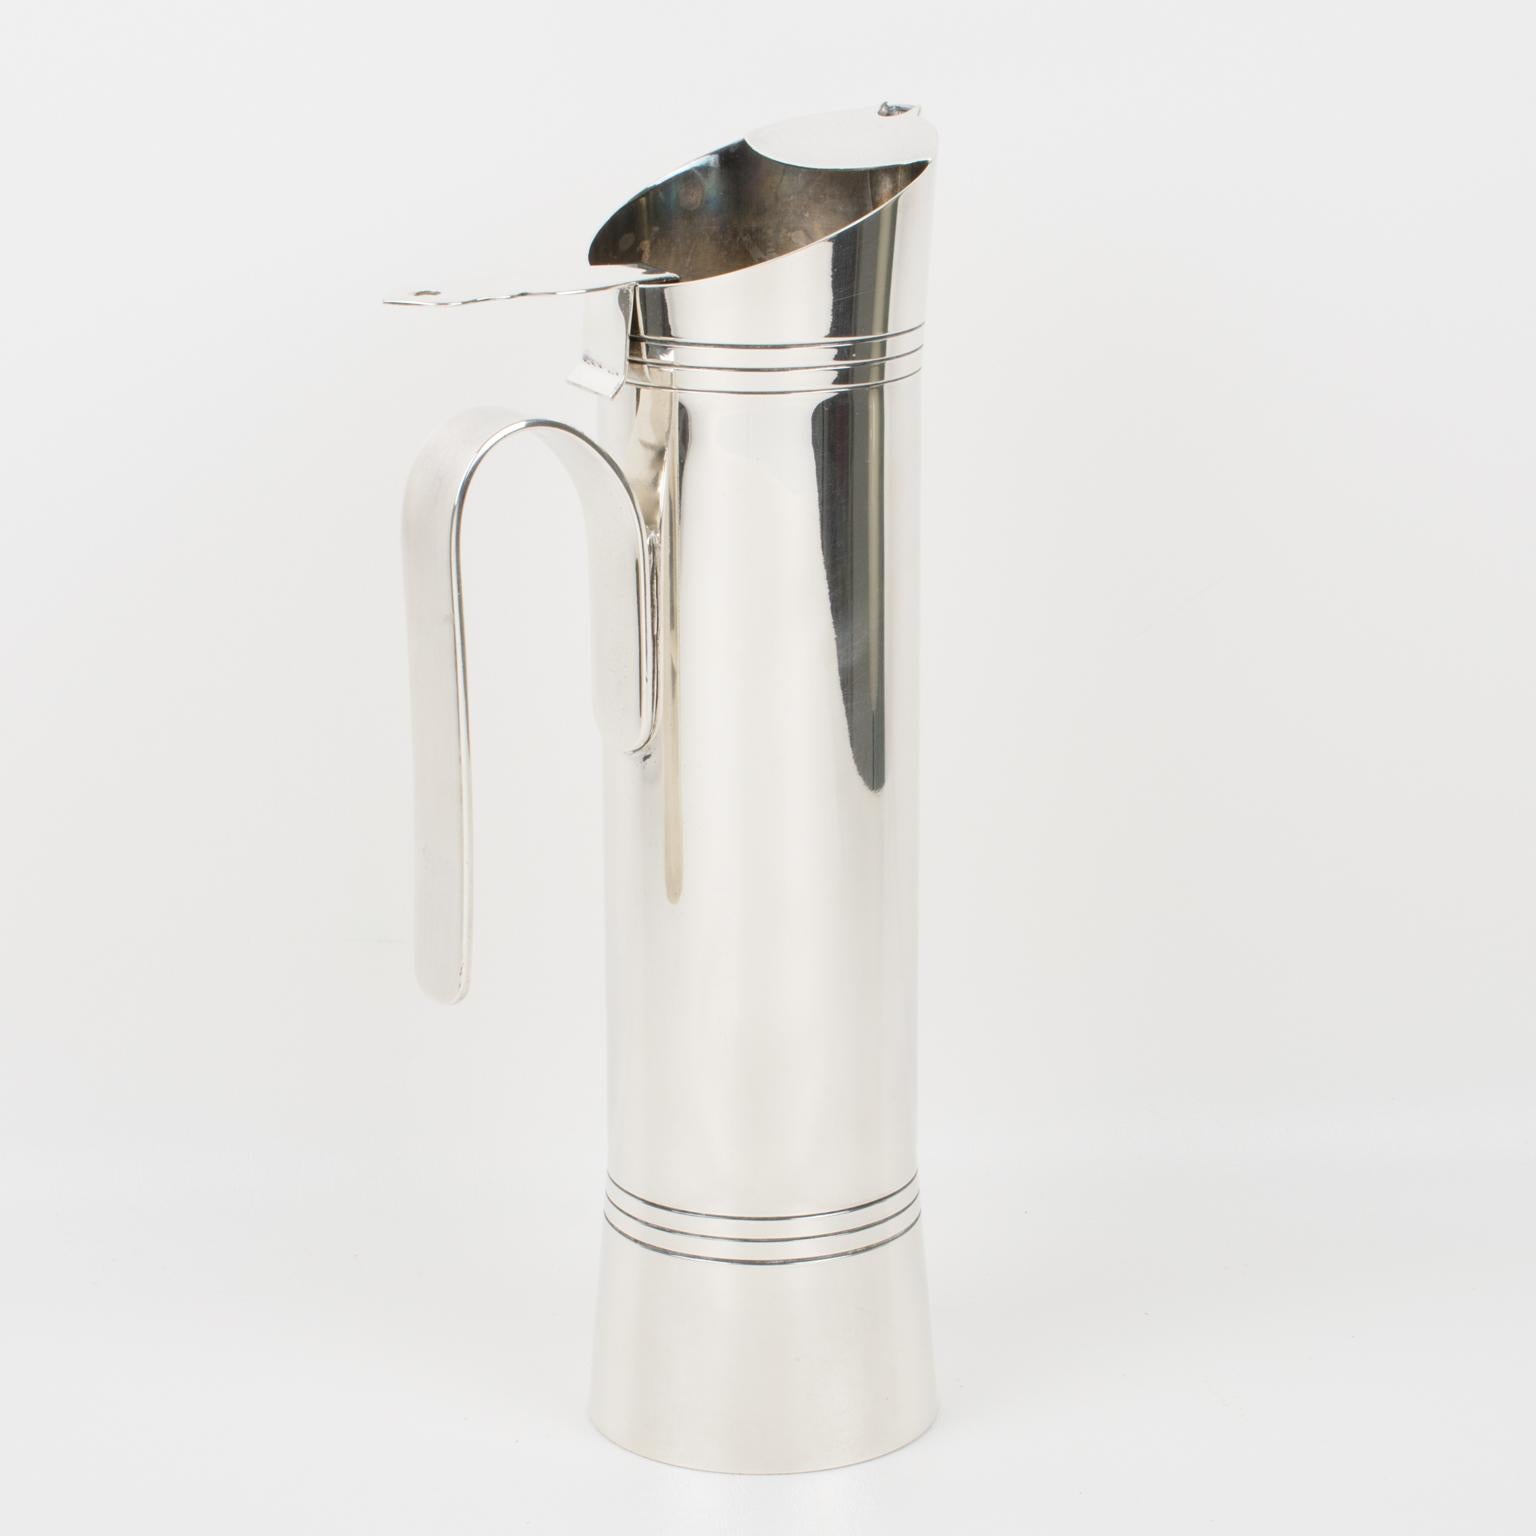 A streamline silverplate barware Martini pitcher designed by Italian silver master Giuliano Bossi for Ibis, Milano. Sleek and modernist design with extra tall shape. Marked underside: Silverplated - Ibis - Bossi (for Giuliano Bossi), Italy. It will